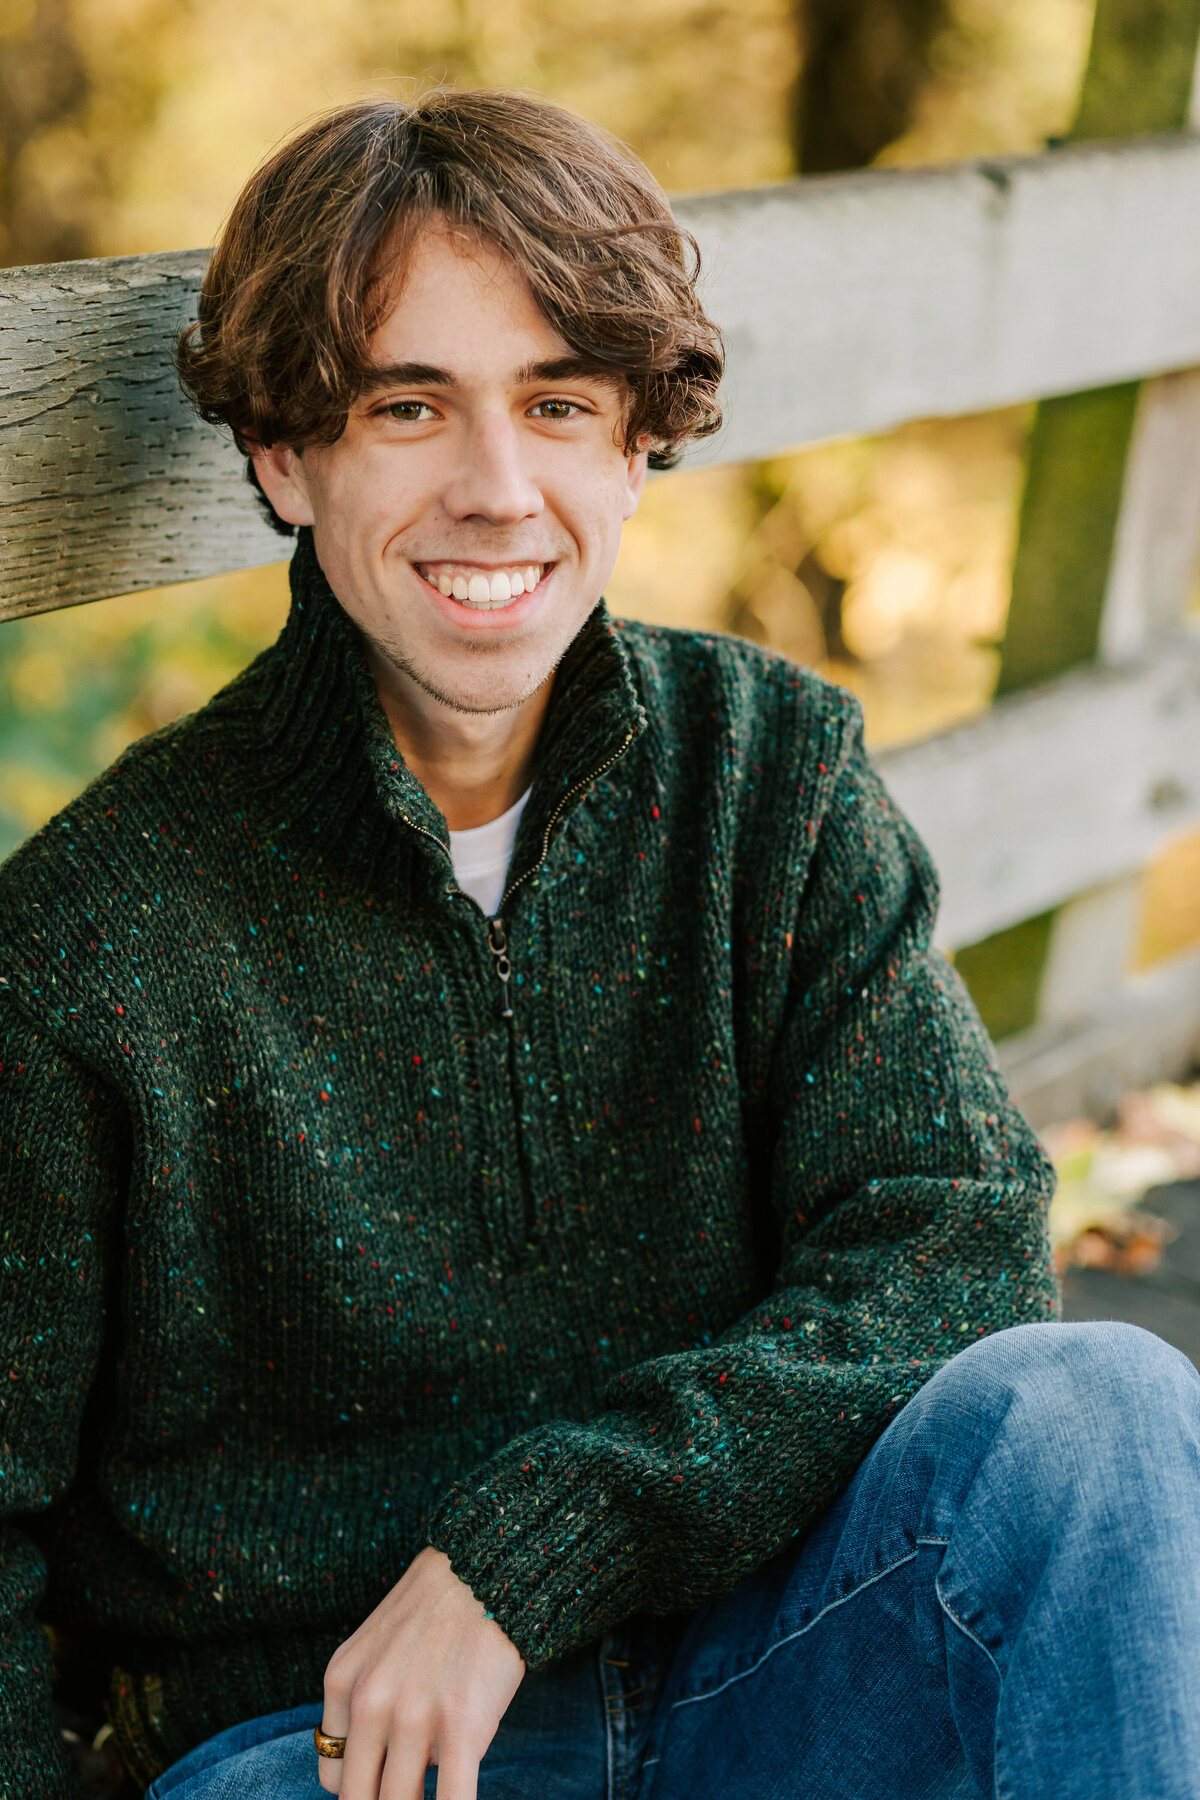 A young man in a green sweater sits against a fence